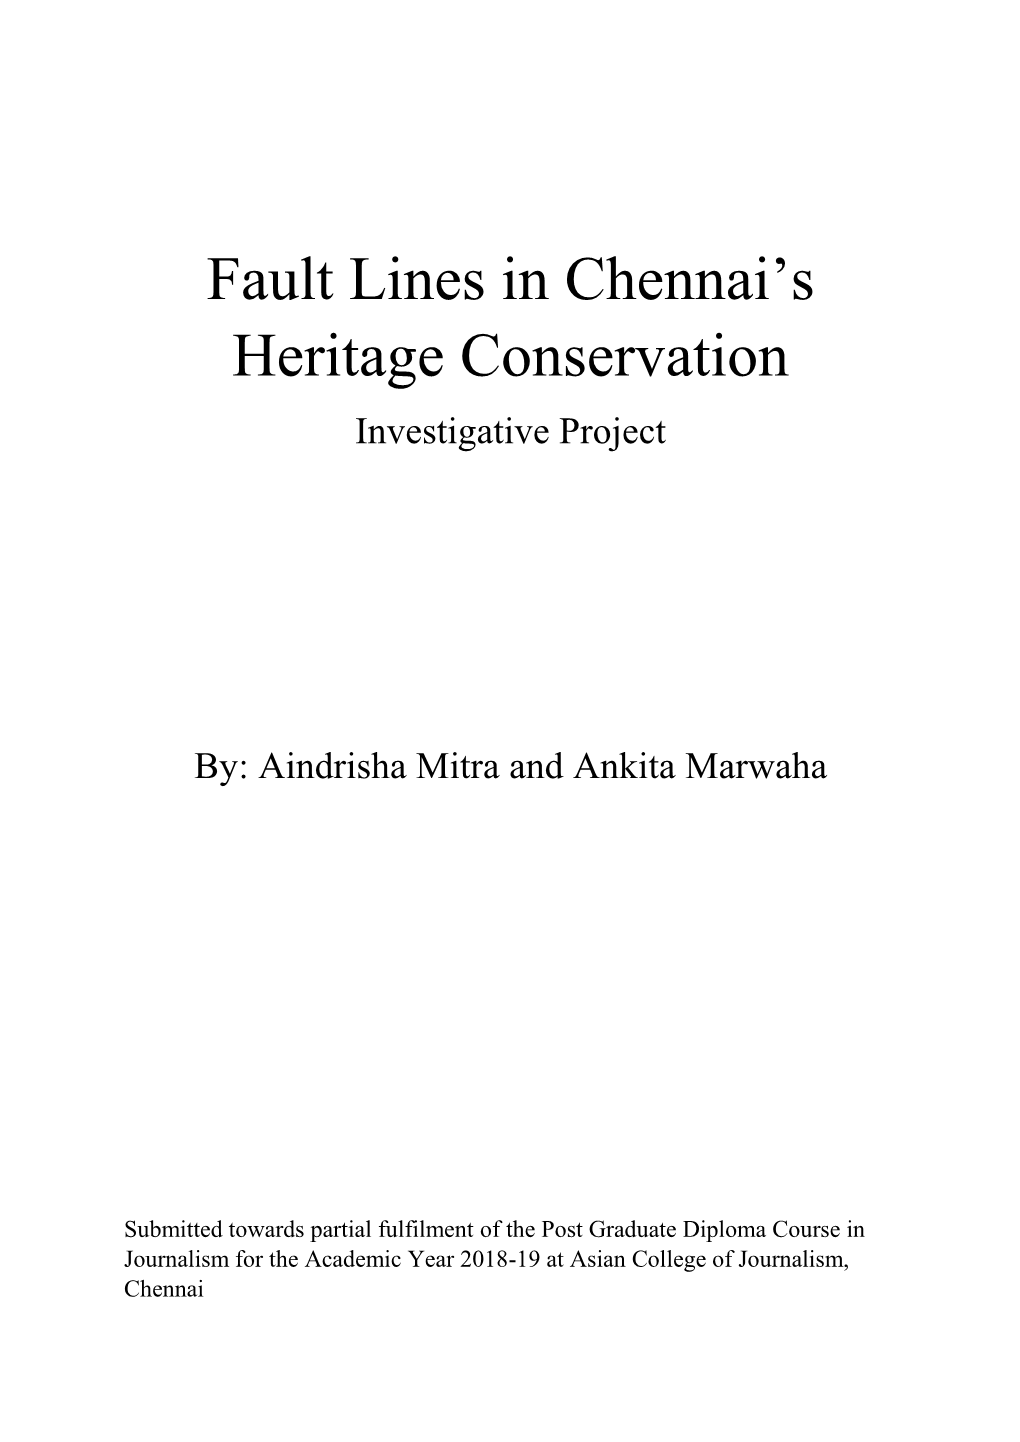 Fault Lines in Chennai's Heritage Conservation